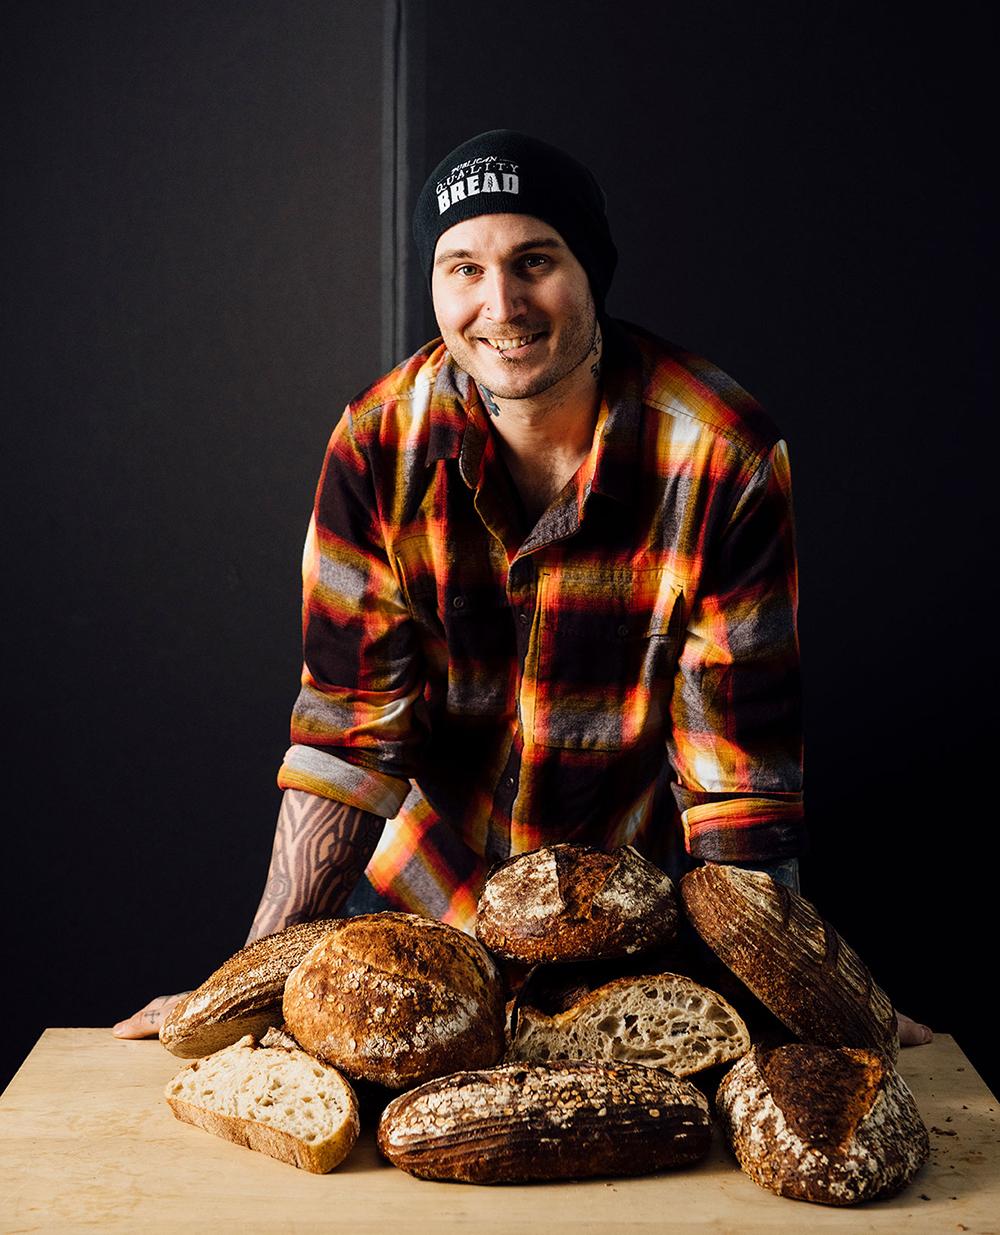 Greg Wade standing in front of several loaves of bread